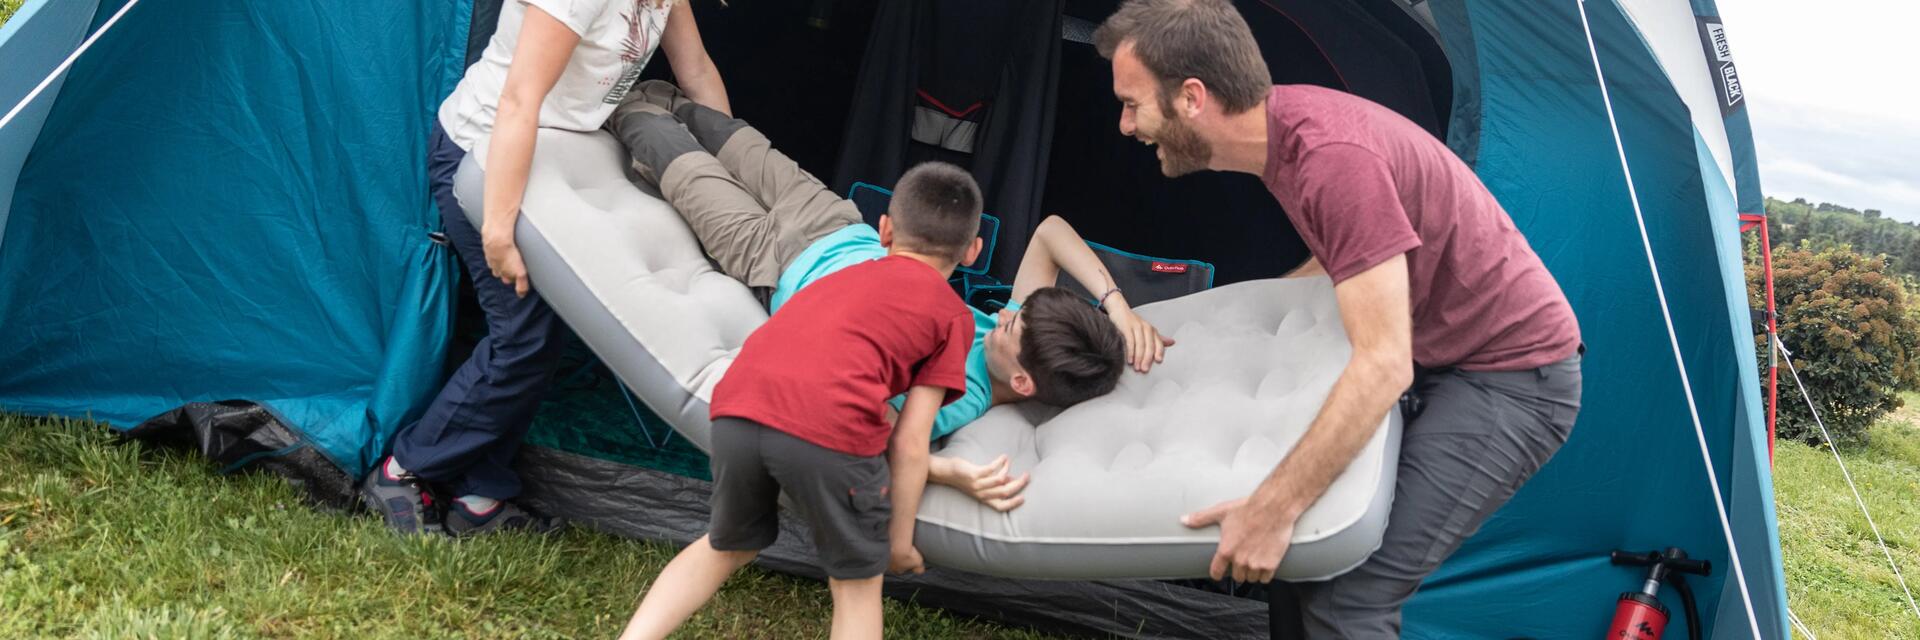 How to use your inflatable mattress correctly - title